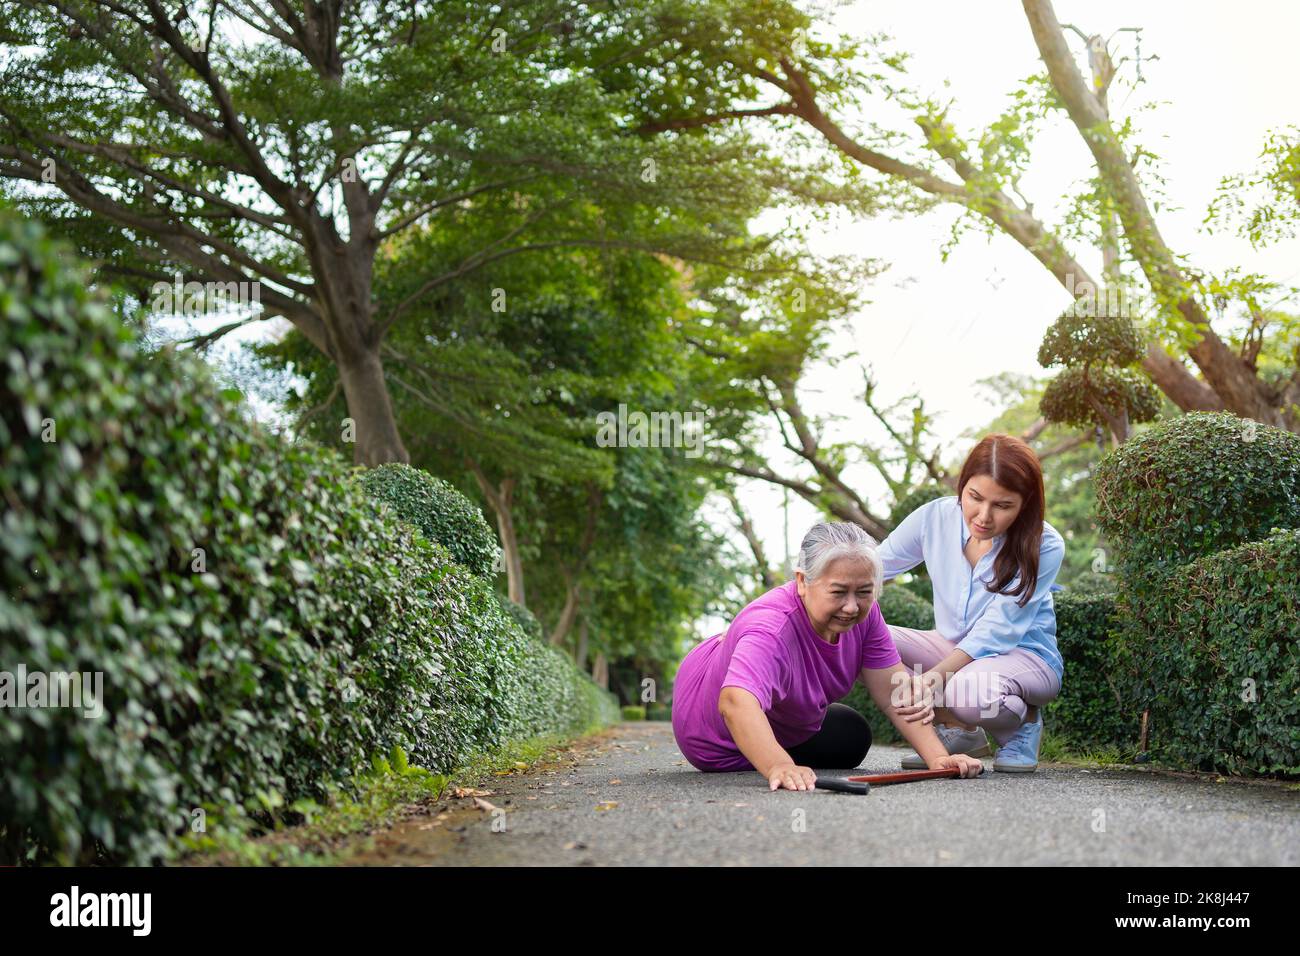 Asian senior woman fell down on lying floor because faint and limb weakness and Crying in pain form accident and her daughter came to help support. Co Stock Photo